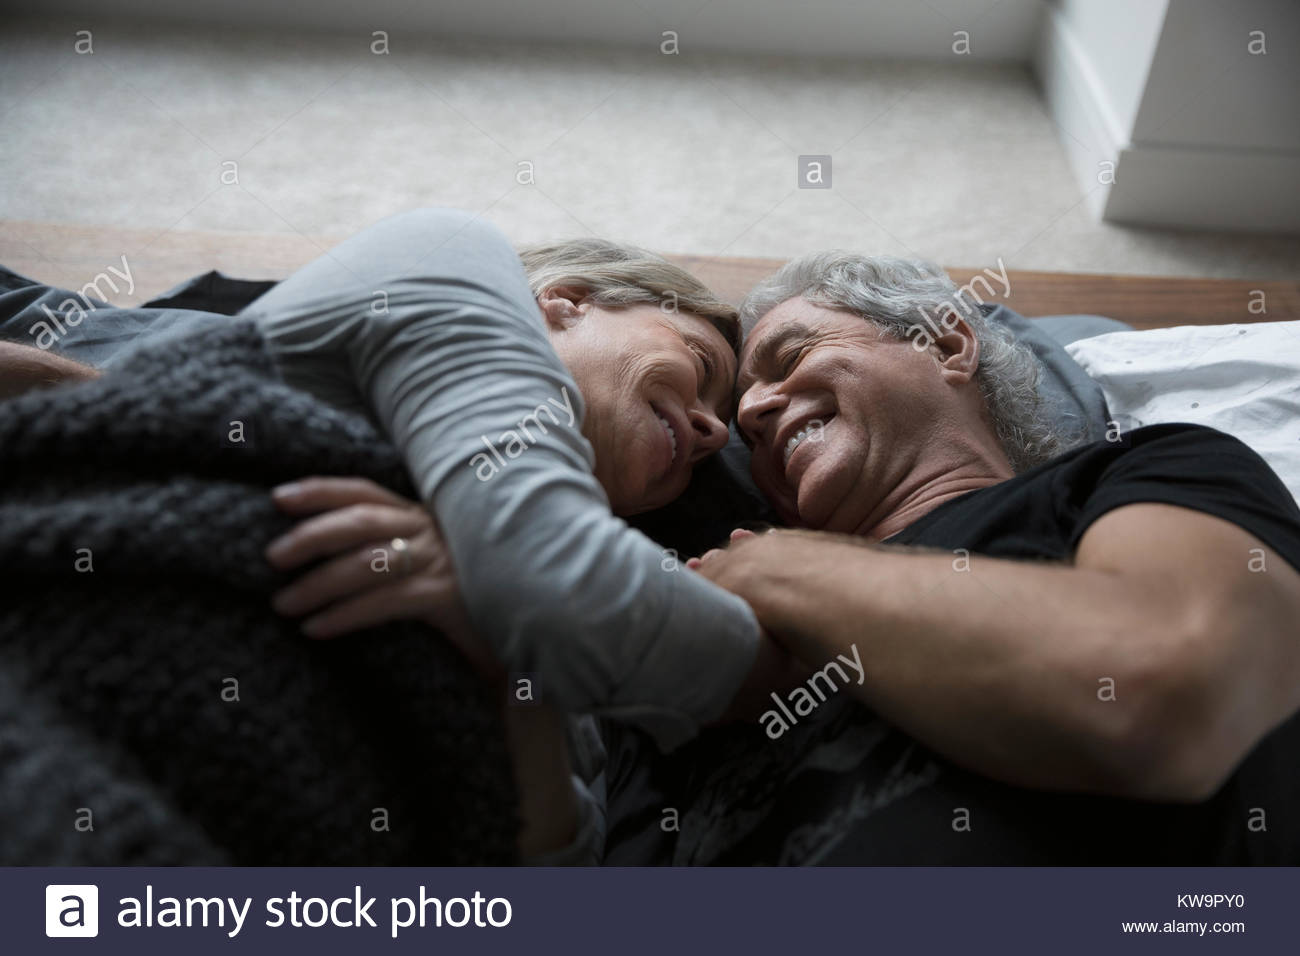 Affectionate,romantic senior couple cuddling in bed Stock Photo